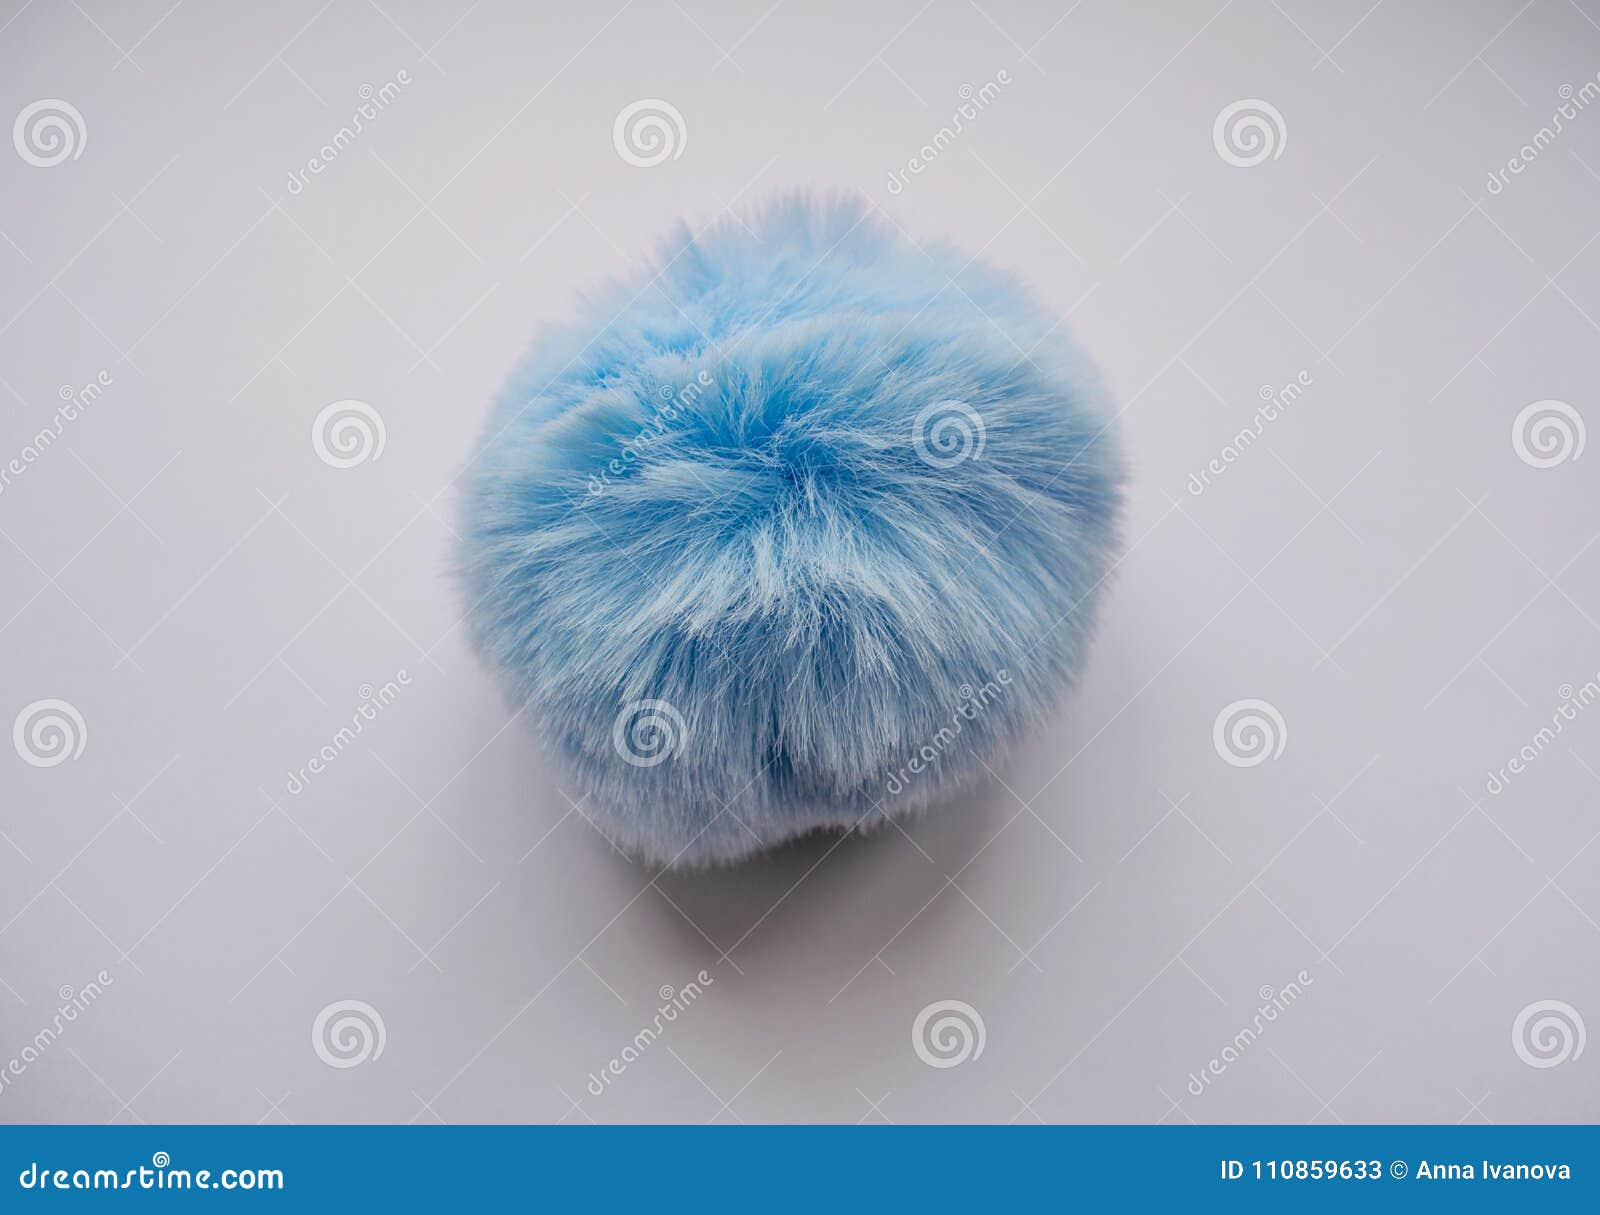 a round, spherical, fluffy, blue, soft ball is a toy.